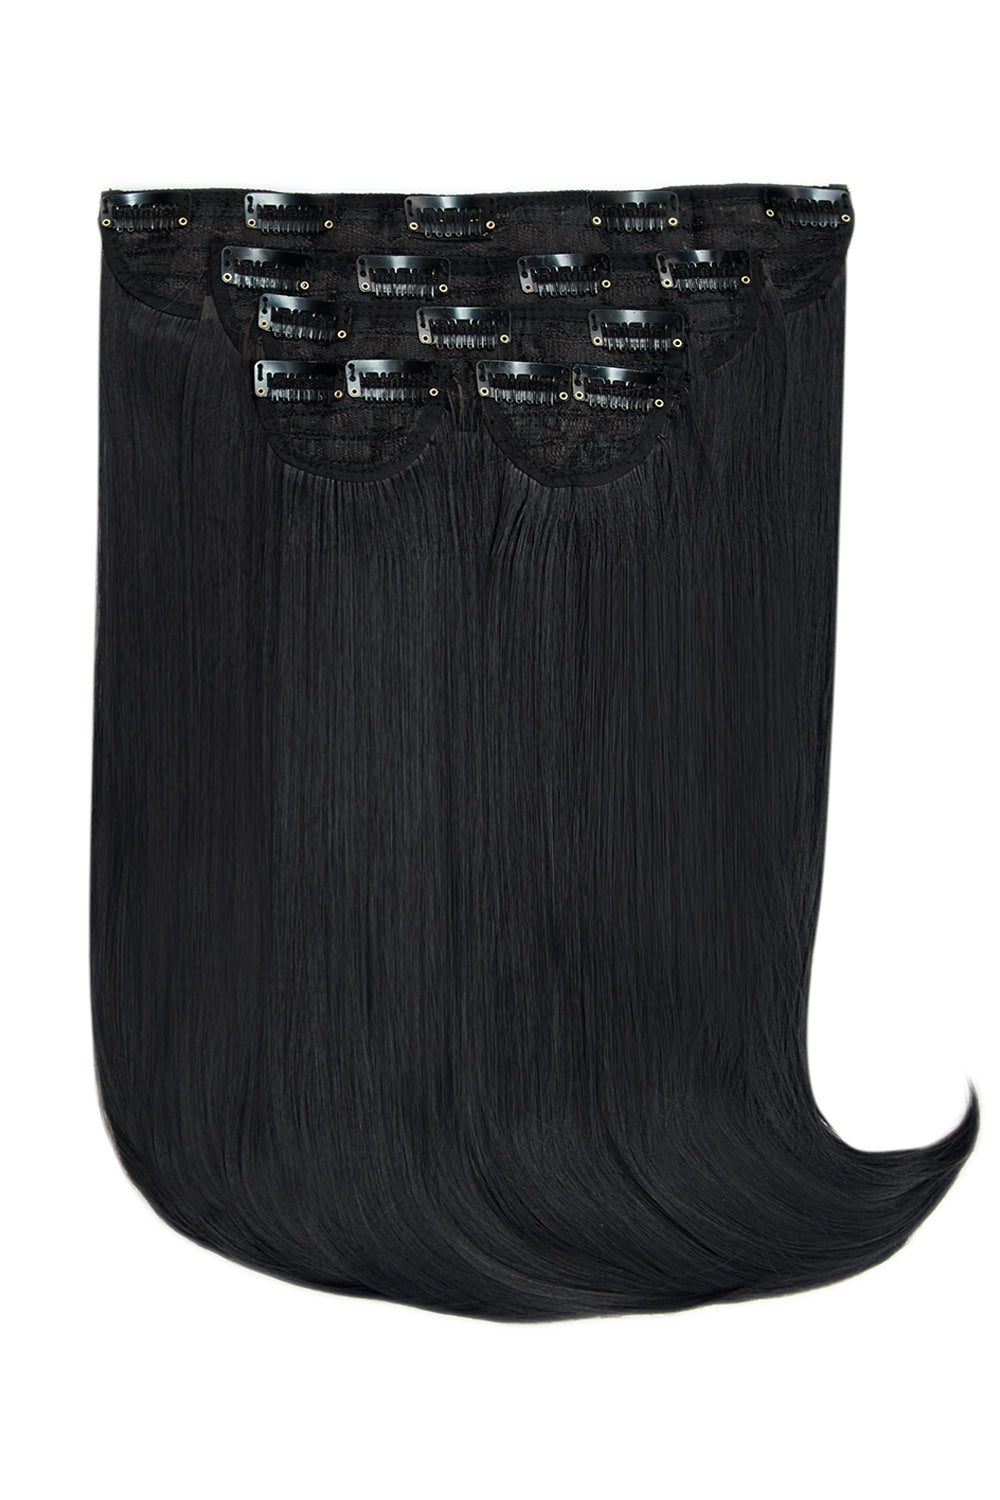 Super Thick 16" 5 Piece Curve Clip In Hair Extensions - Jet Black